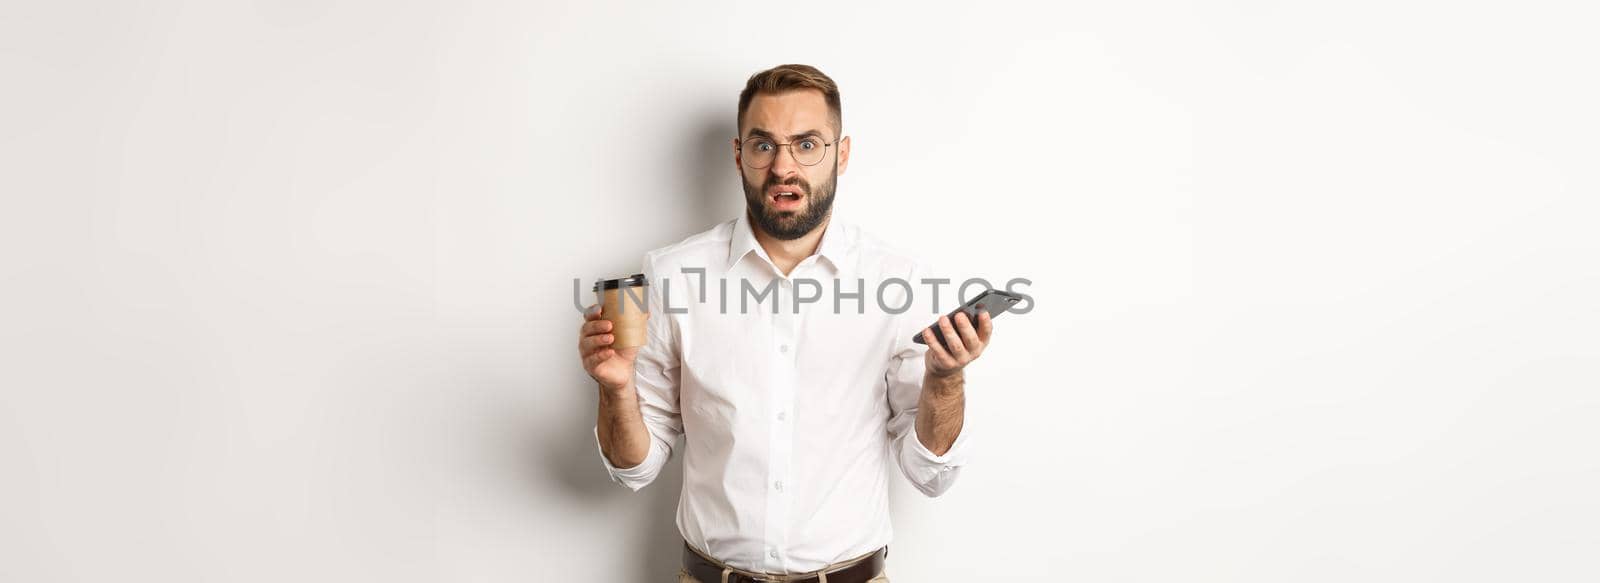 Image of man drinking coffee, feeling confused about strange message on mobile phone, standing over white background.